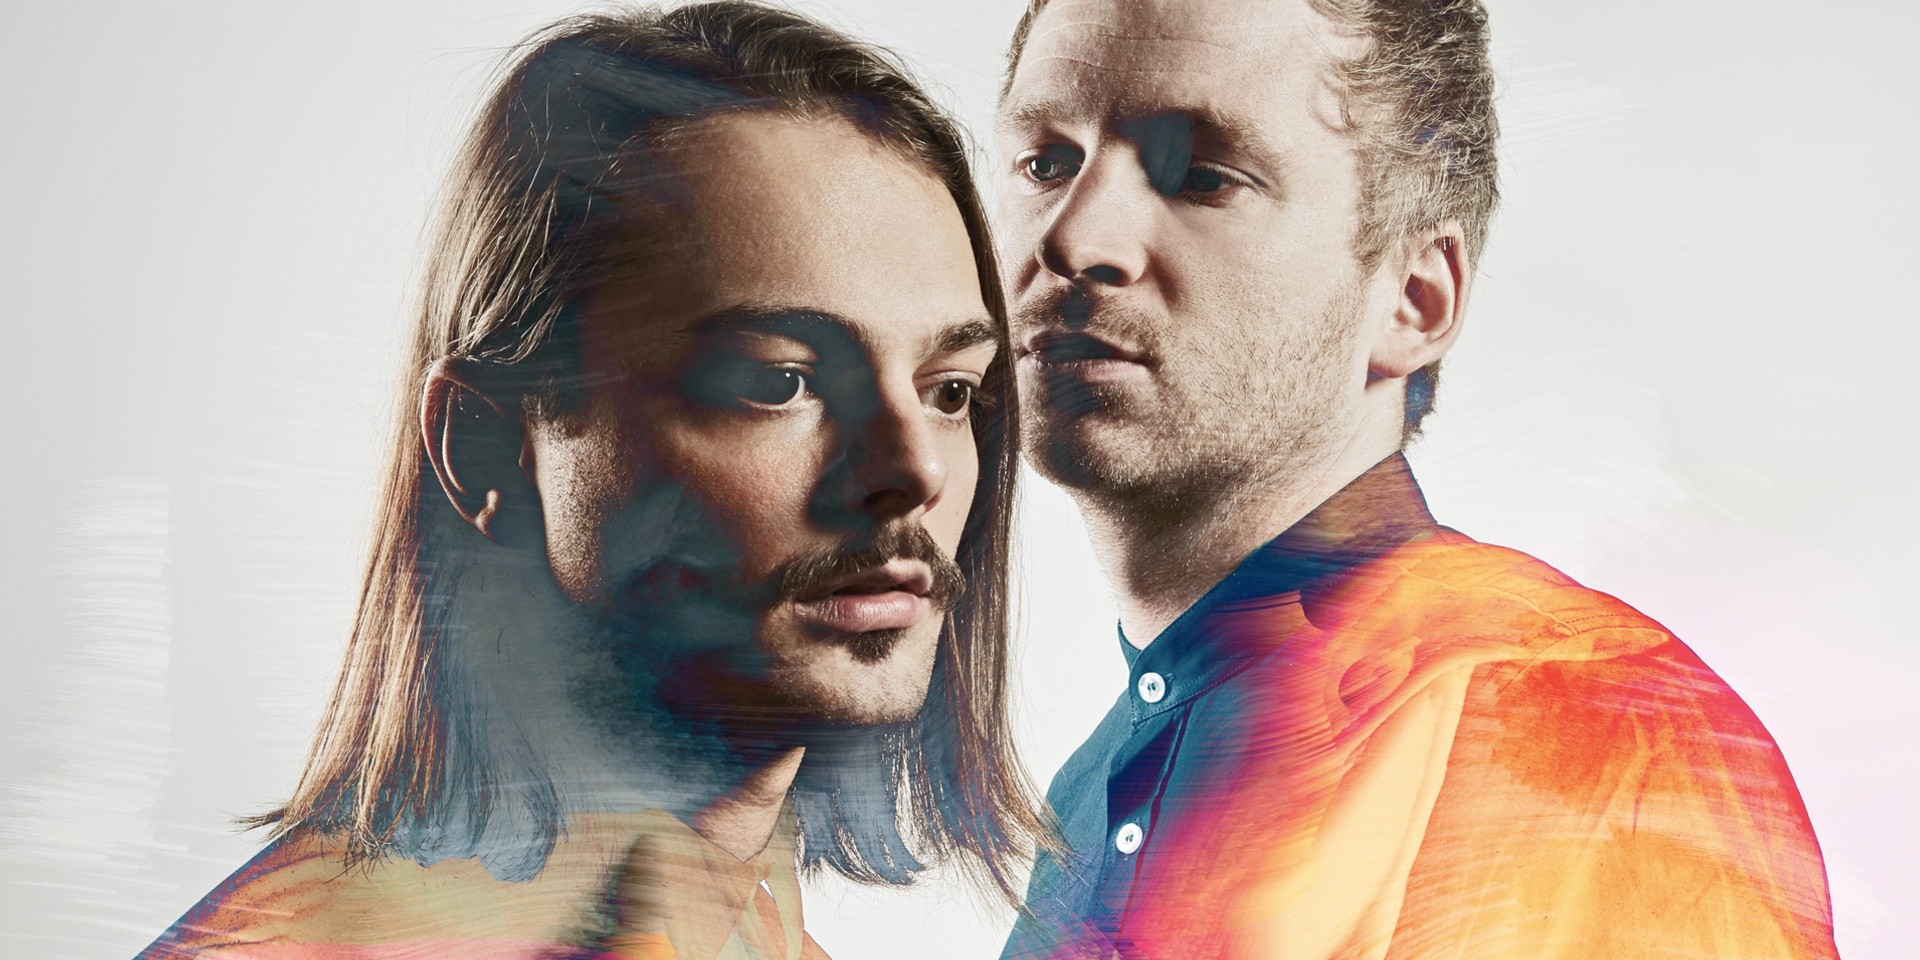 Kiasmos discusses duality, Iceland’s music scene and its stereotypes